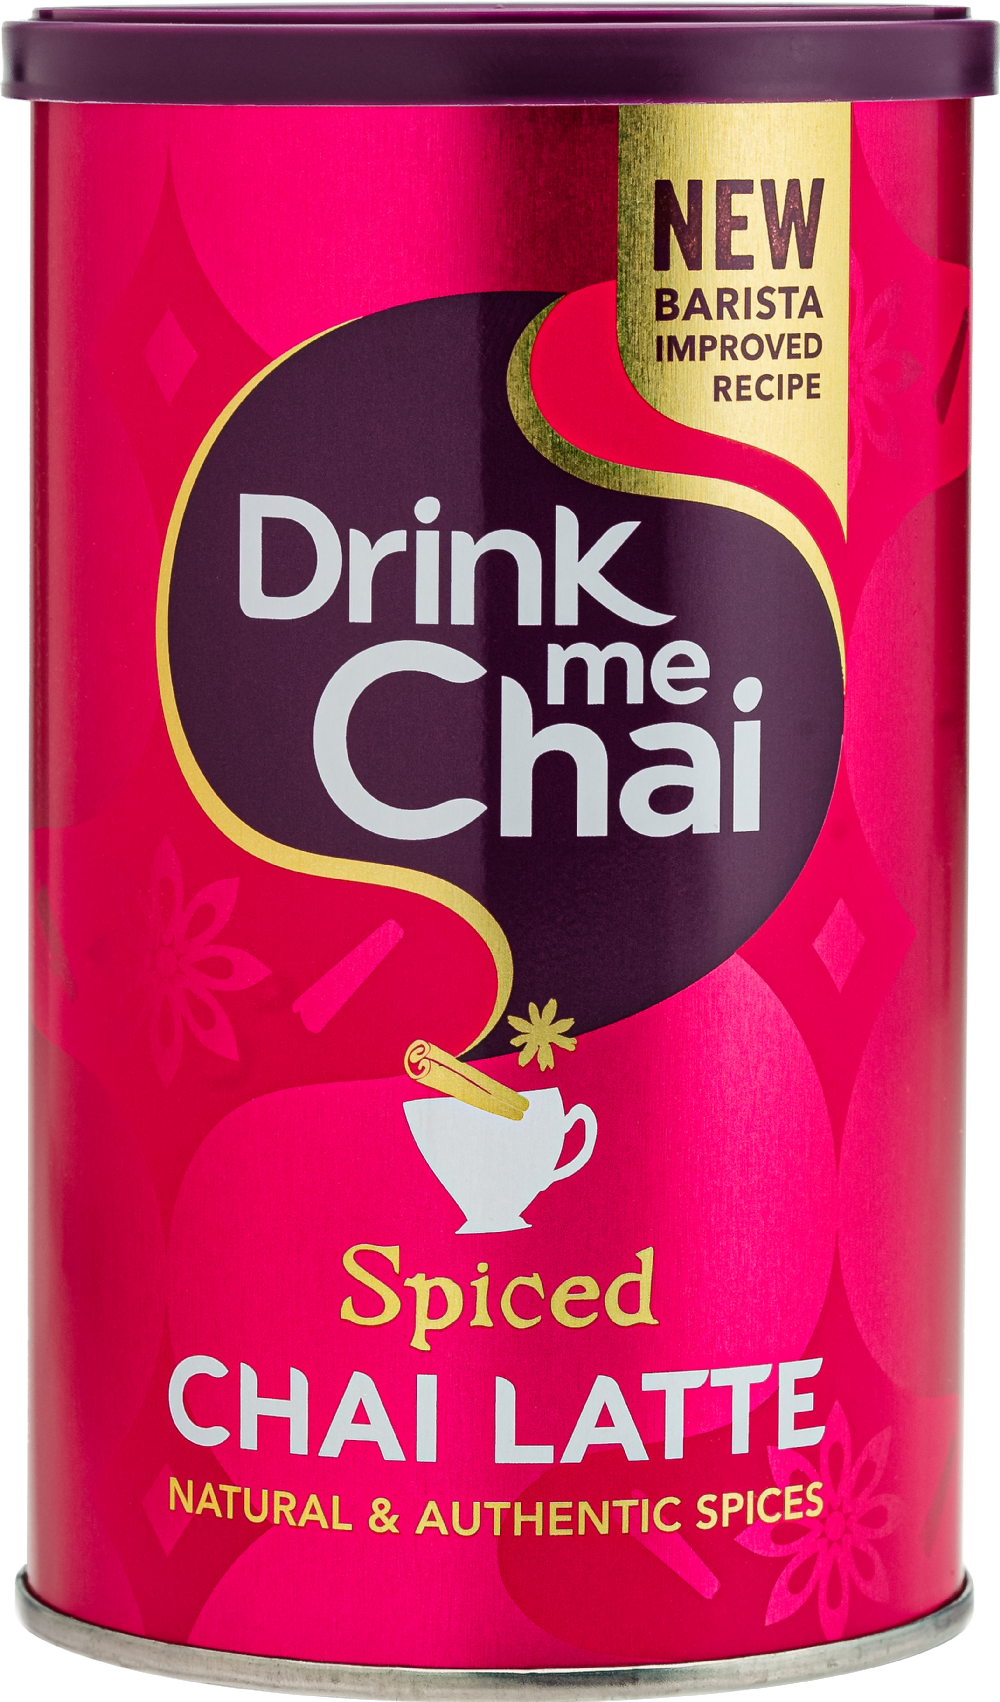 DRINK ME Spiced Chai Latte 250g